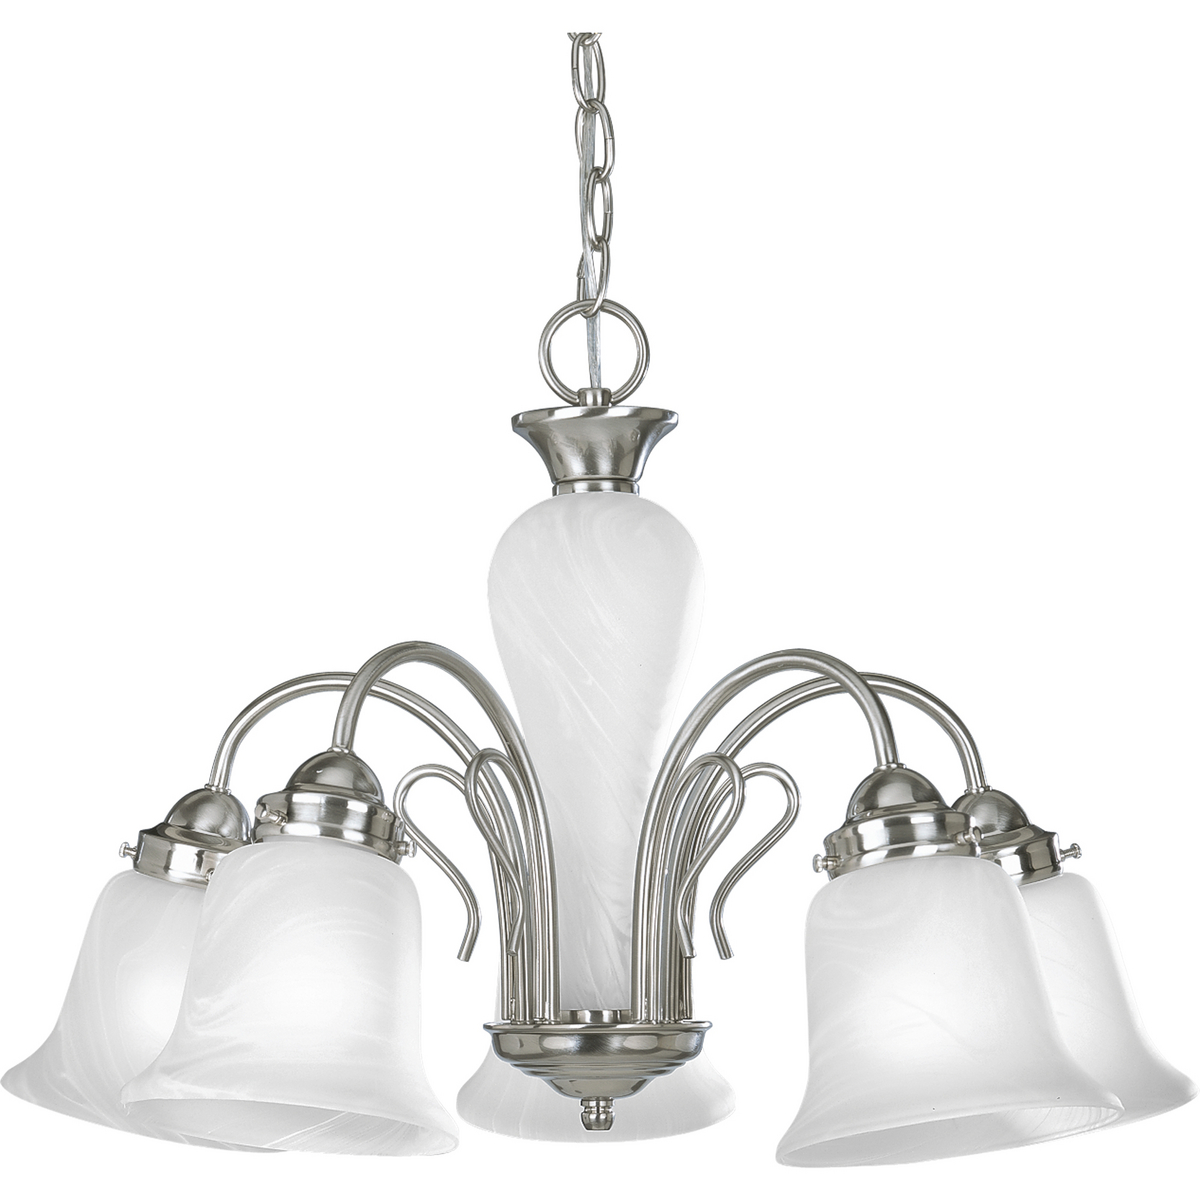 Five-light chandelier with etched alabaster glass shades and center column from the Bedford Collection features softly diffused alabaster glass shades on a finely crafted frame. Striking metallic finish adds richness and depth to the fixture. The style blends well with today's home fashion and provides the perfect accent to your decor.